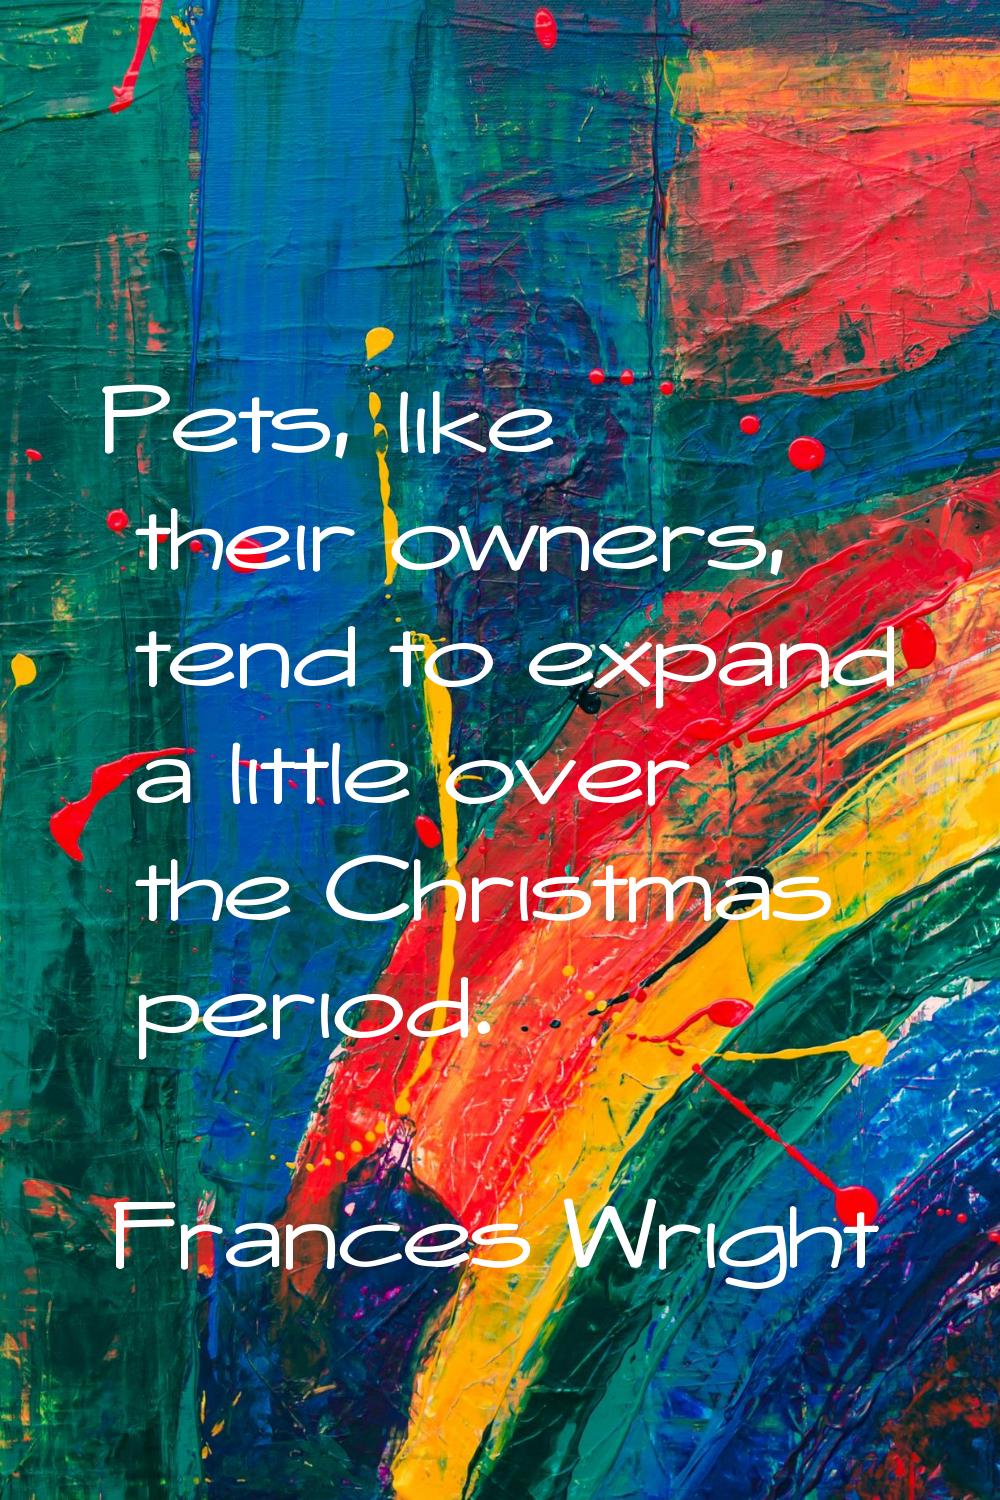 Pets, like their owners, tend to expand a little over the Christmas period.